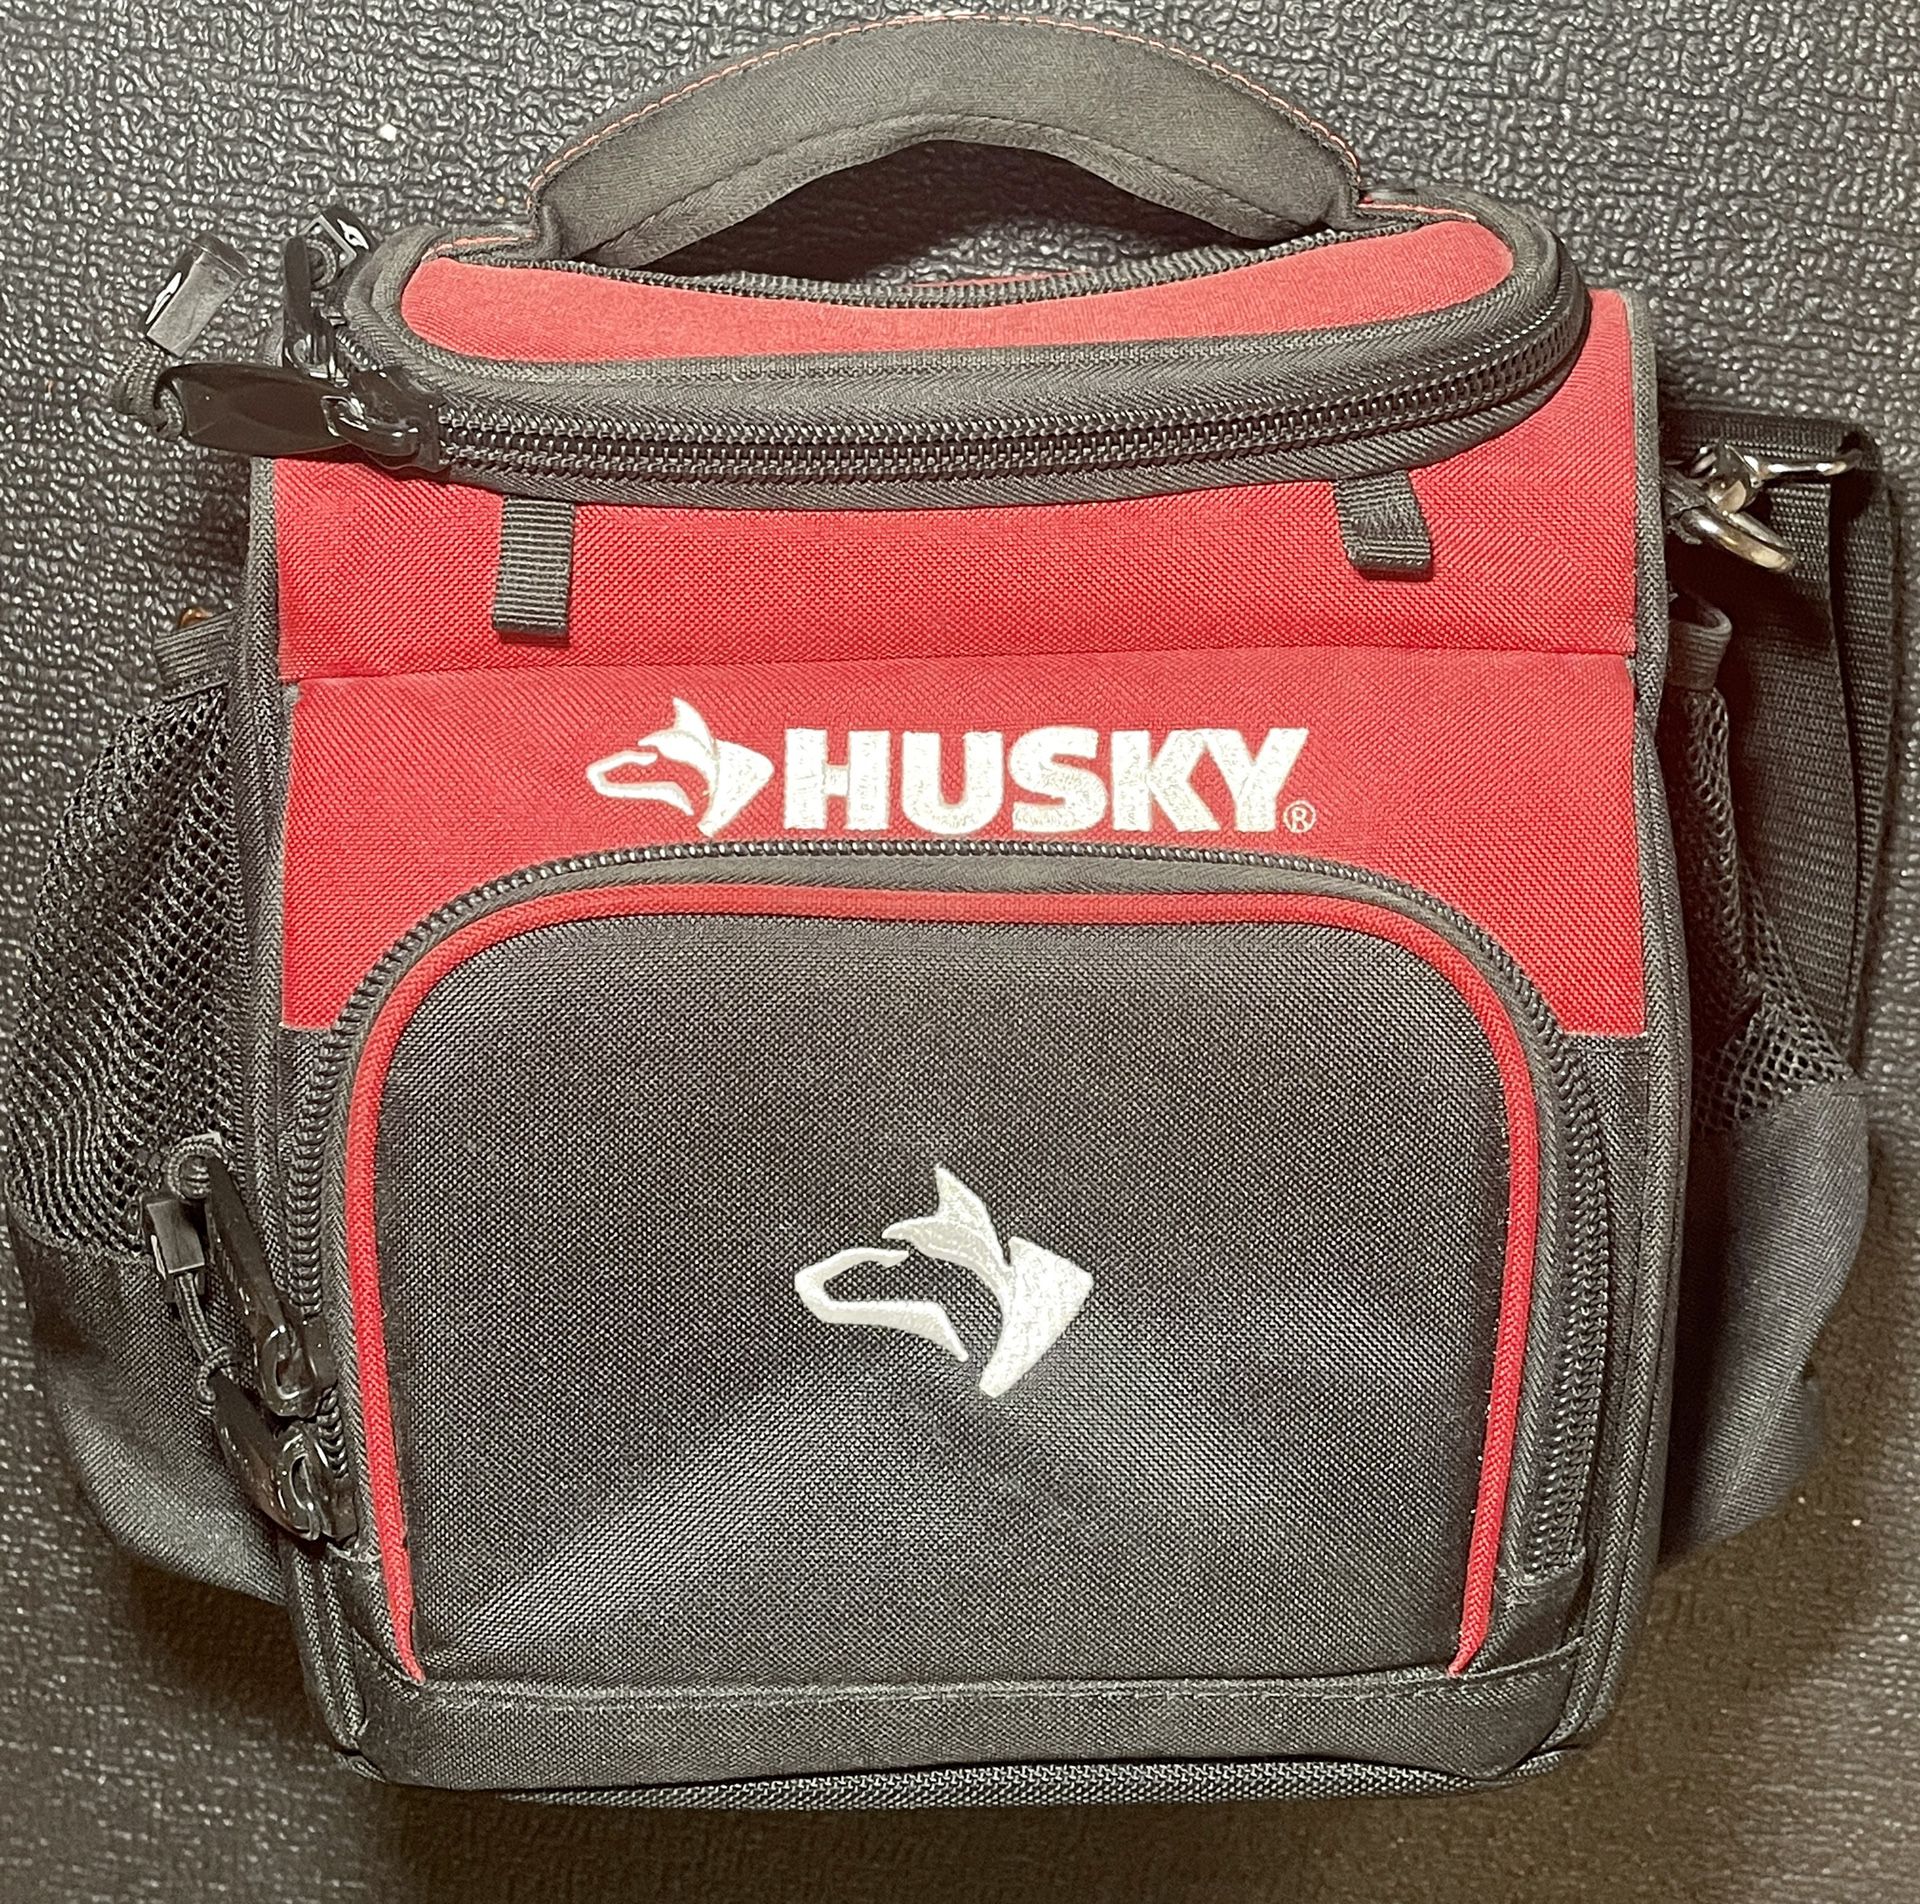 Husky 600D  Insulated Cooler w/ 2 Mesh Sleeves & Carrying Strap